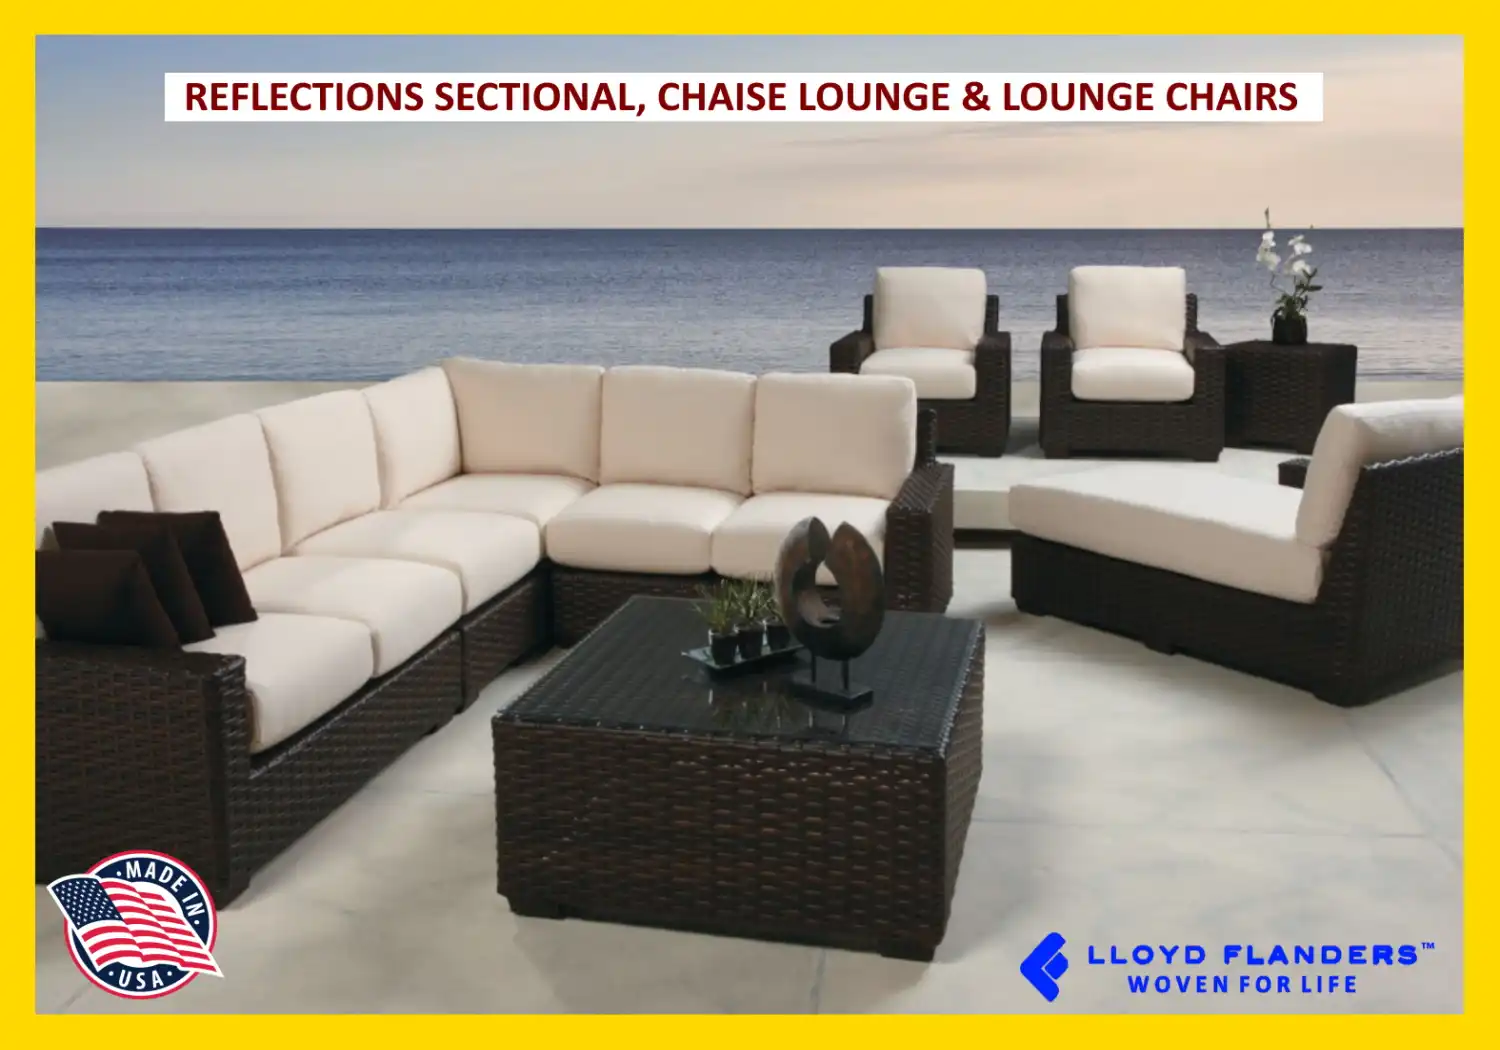 REFLECTIONS SECTIONAL, CHAISE LOUNGE & LOUNGE CHAIRS